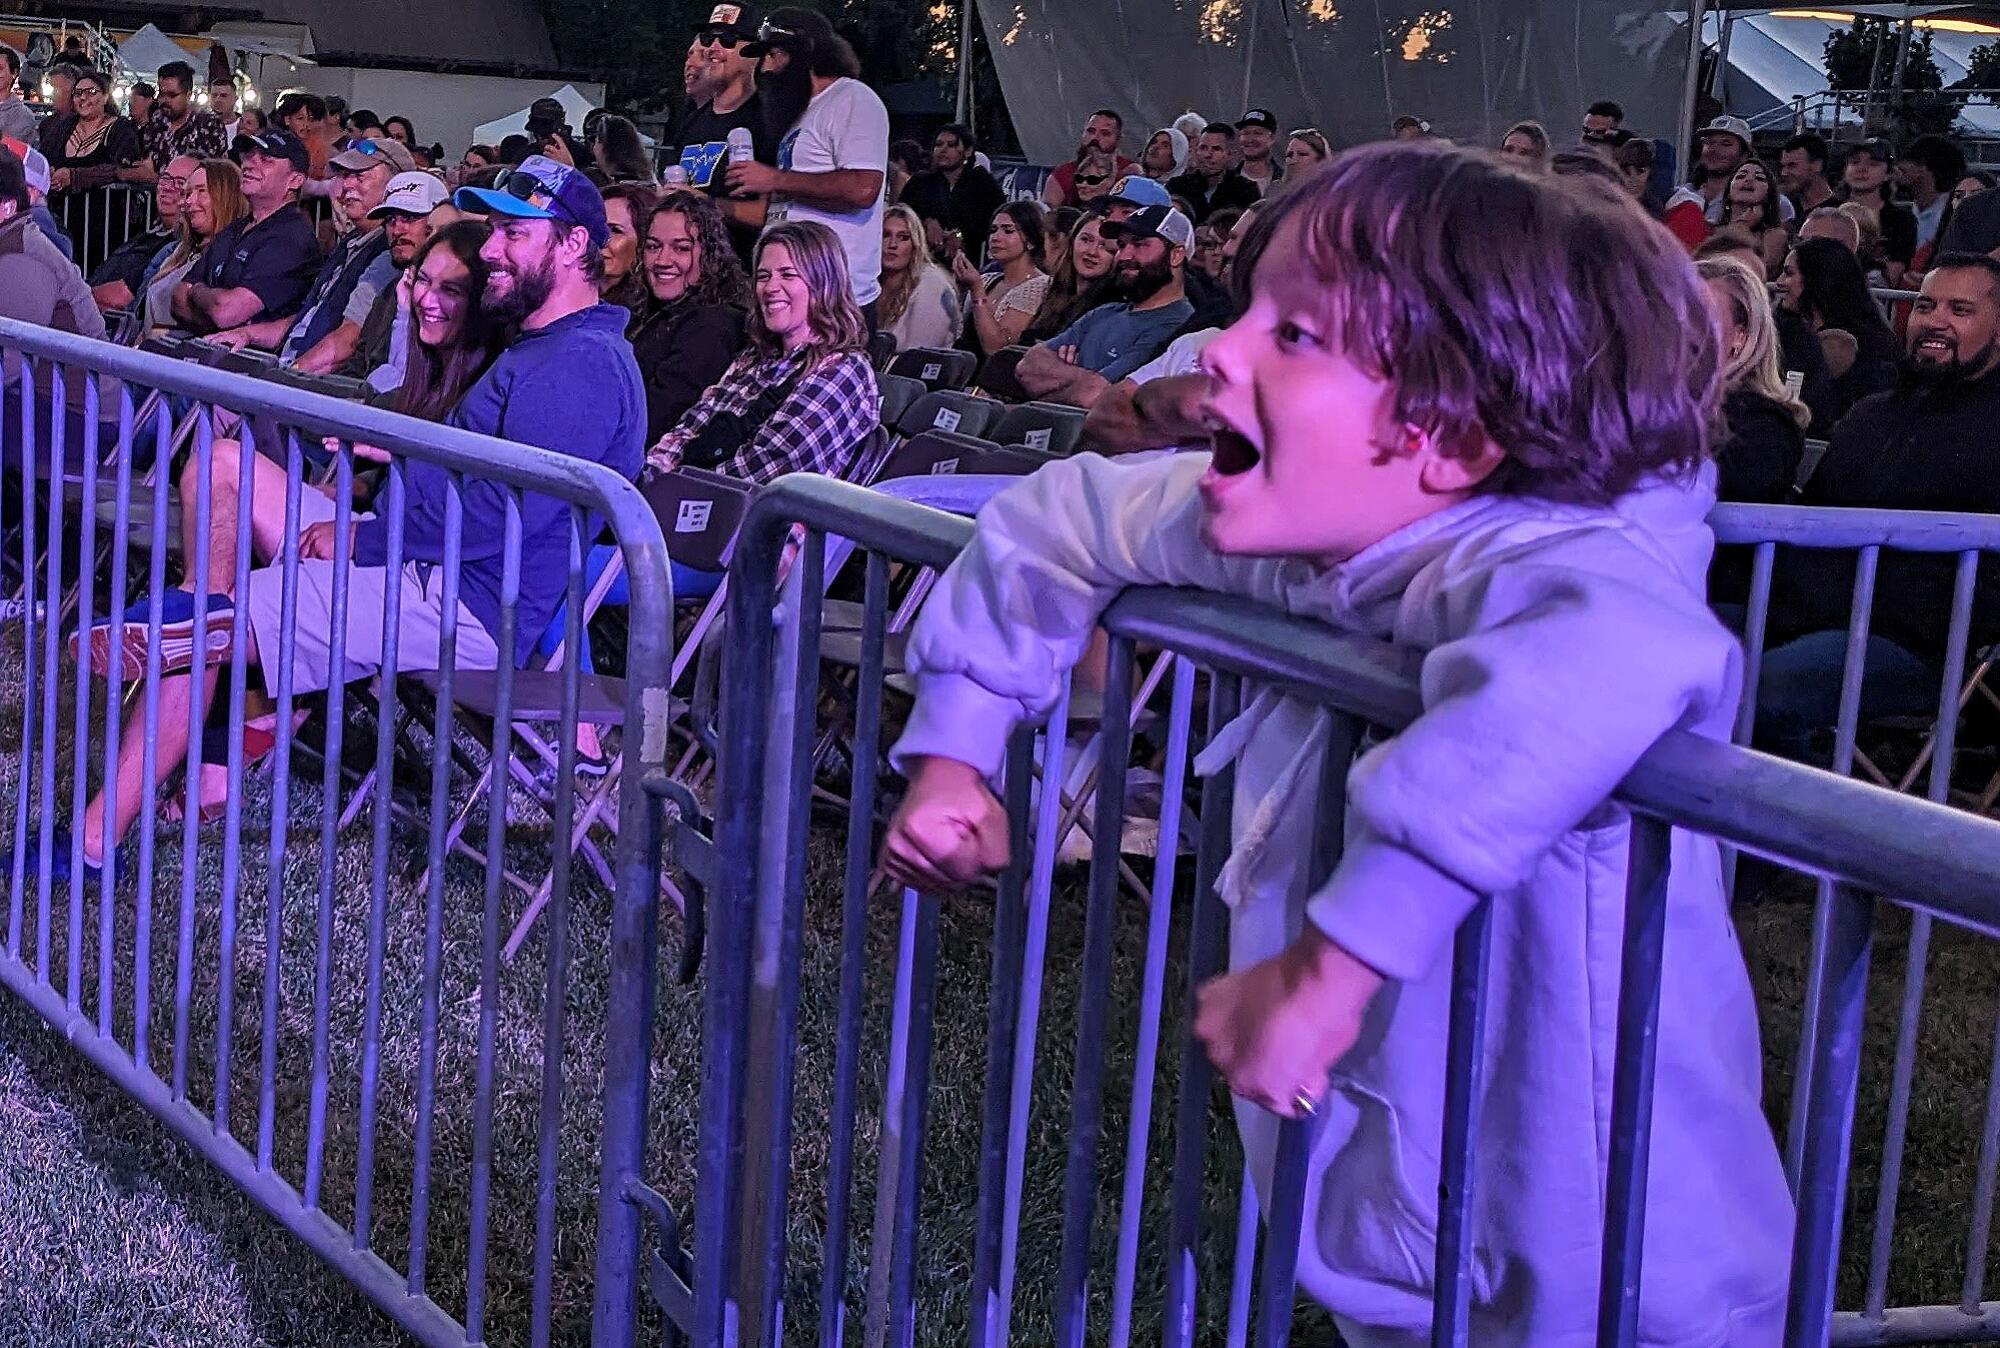 A child behind a metal barricade has his mouth open, with people seated to his right.